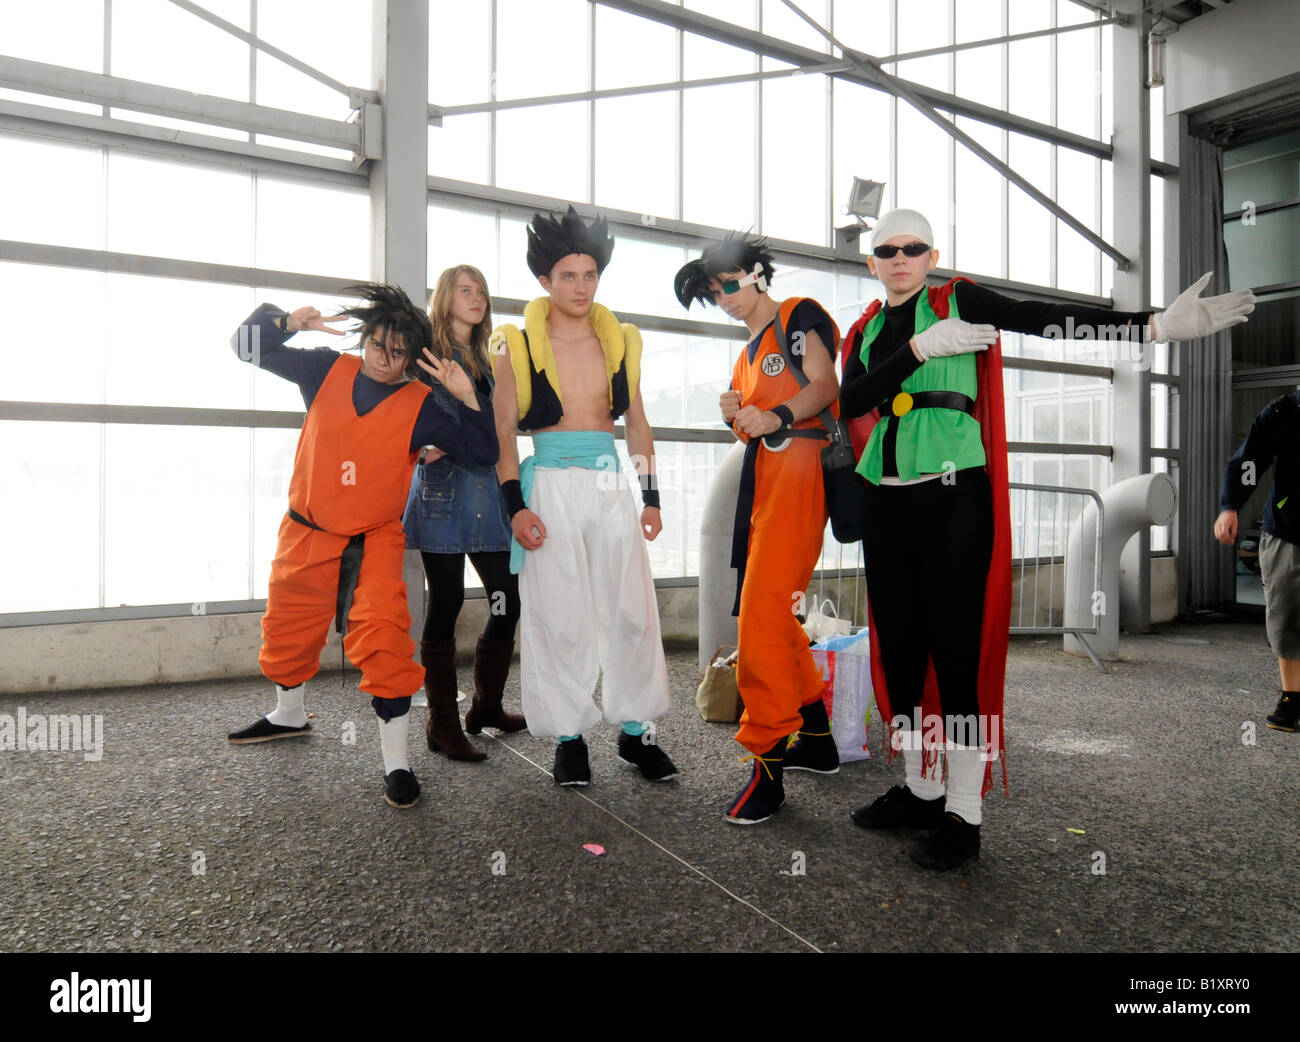 Fans of the Japanese manga 'Dragon Ball' dressing up as their heroes during a cosplay event at the Japan Expo exhibition fair. Stock Photo